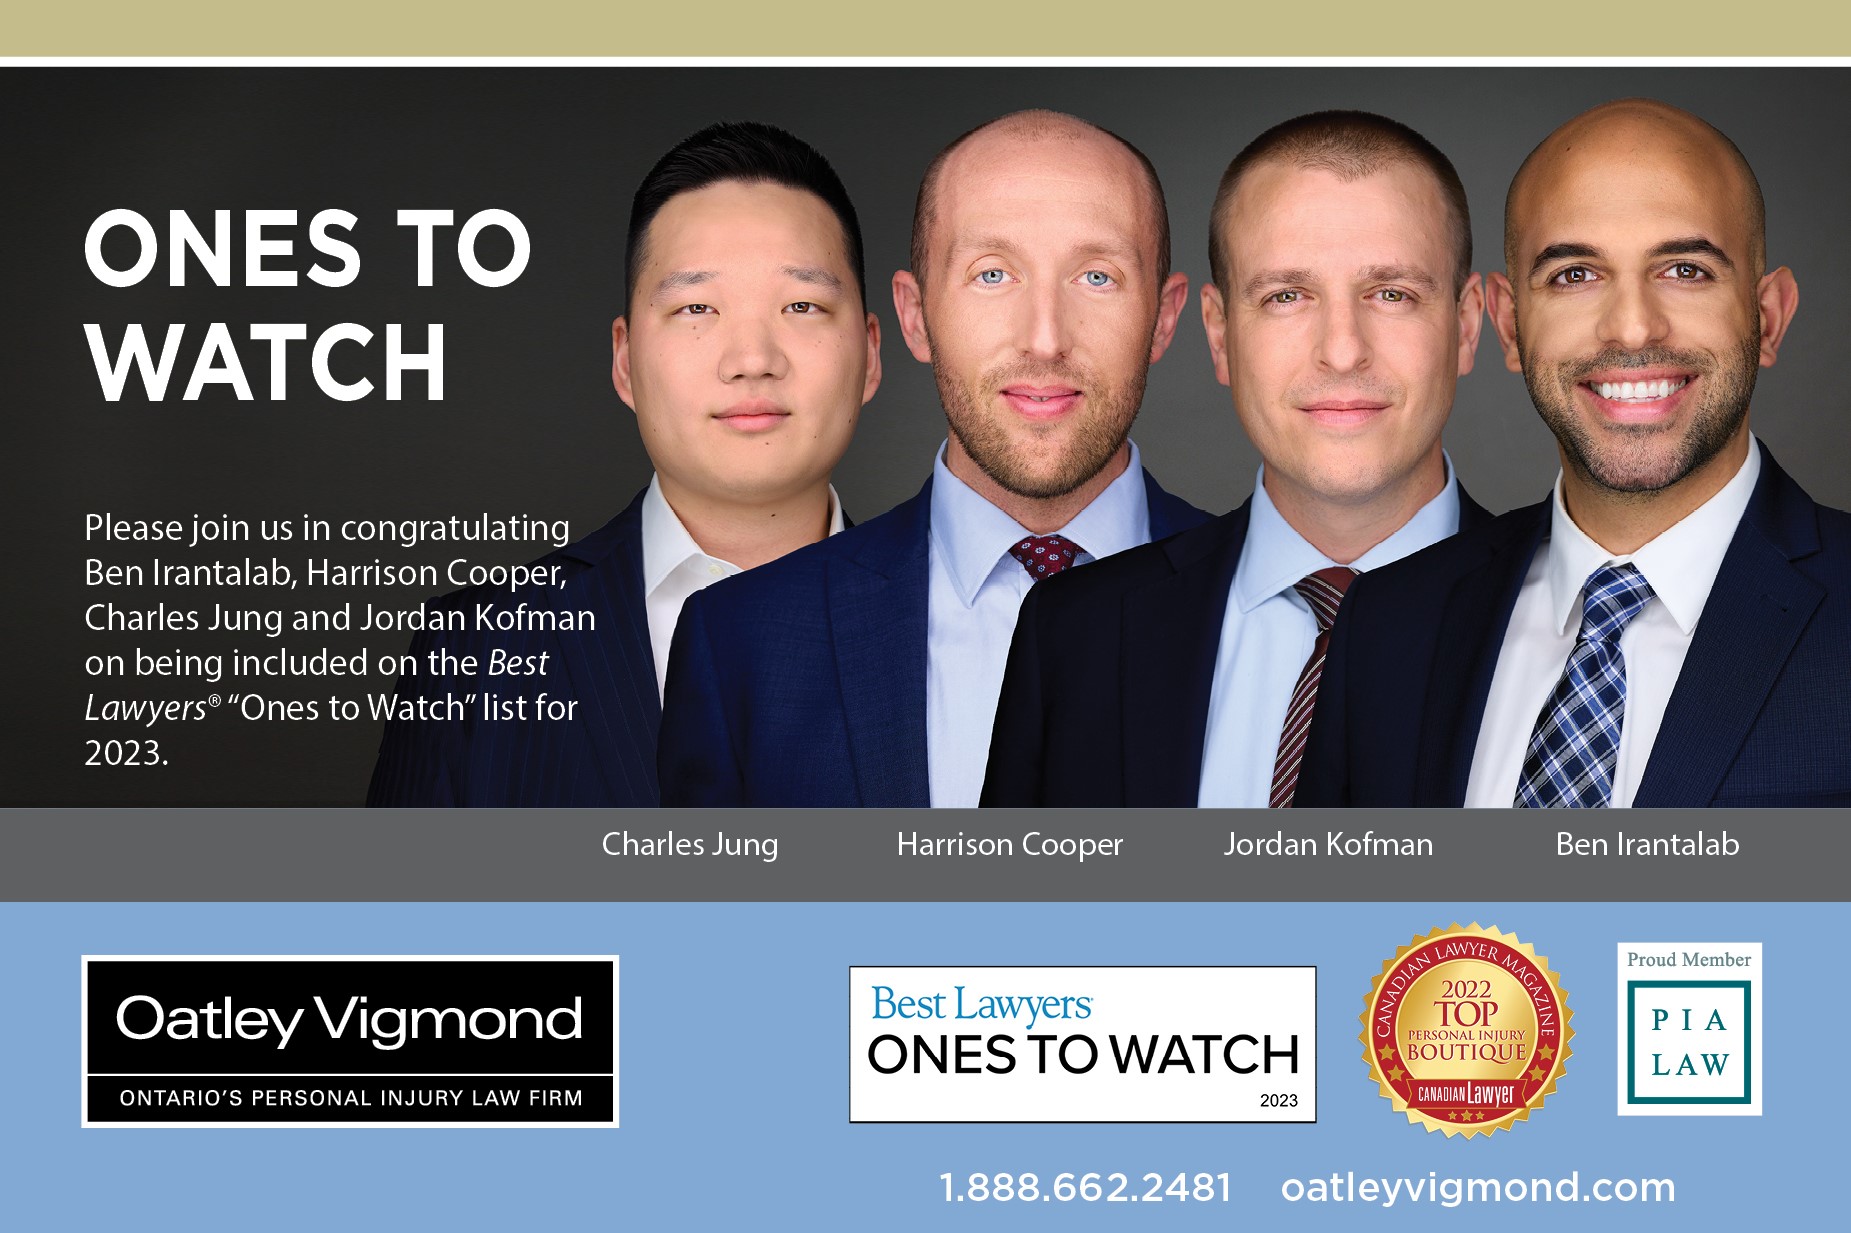 Four Oatley Vigmond Associates Named “Ones To Watch” By Best Lawyers® for 2023